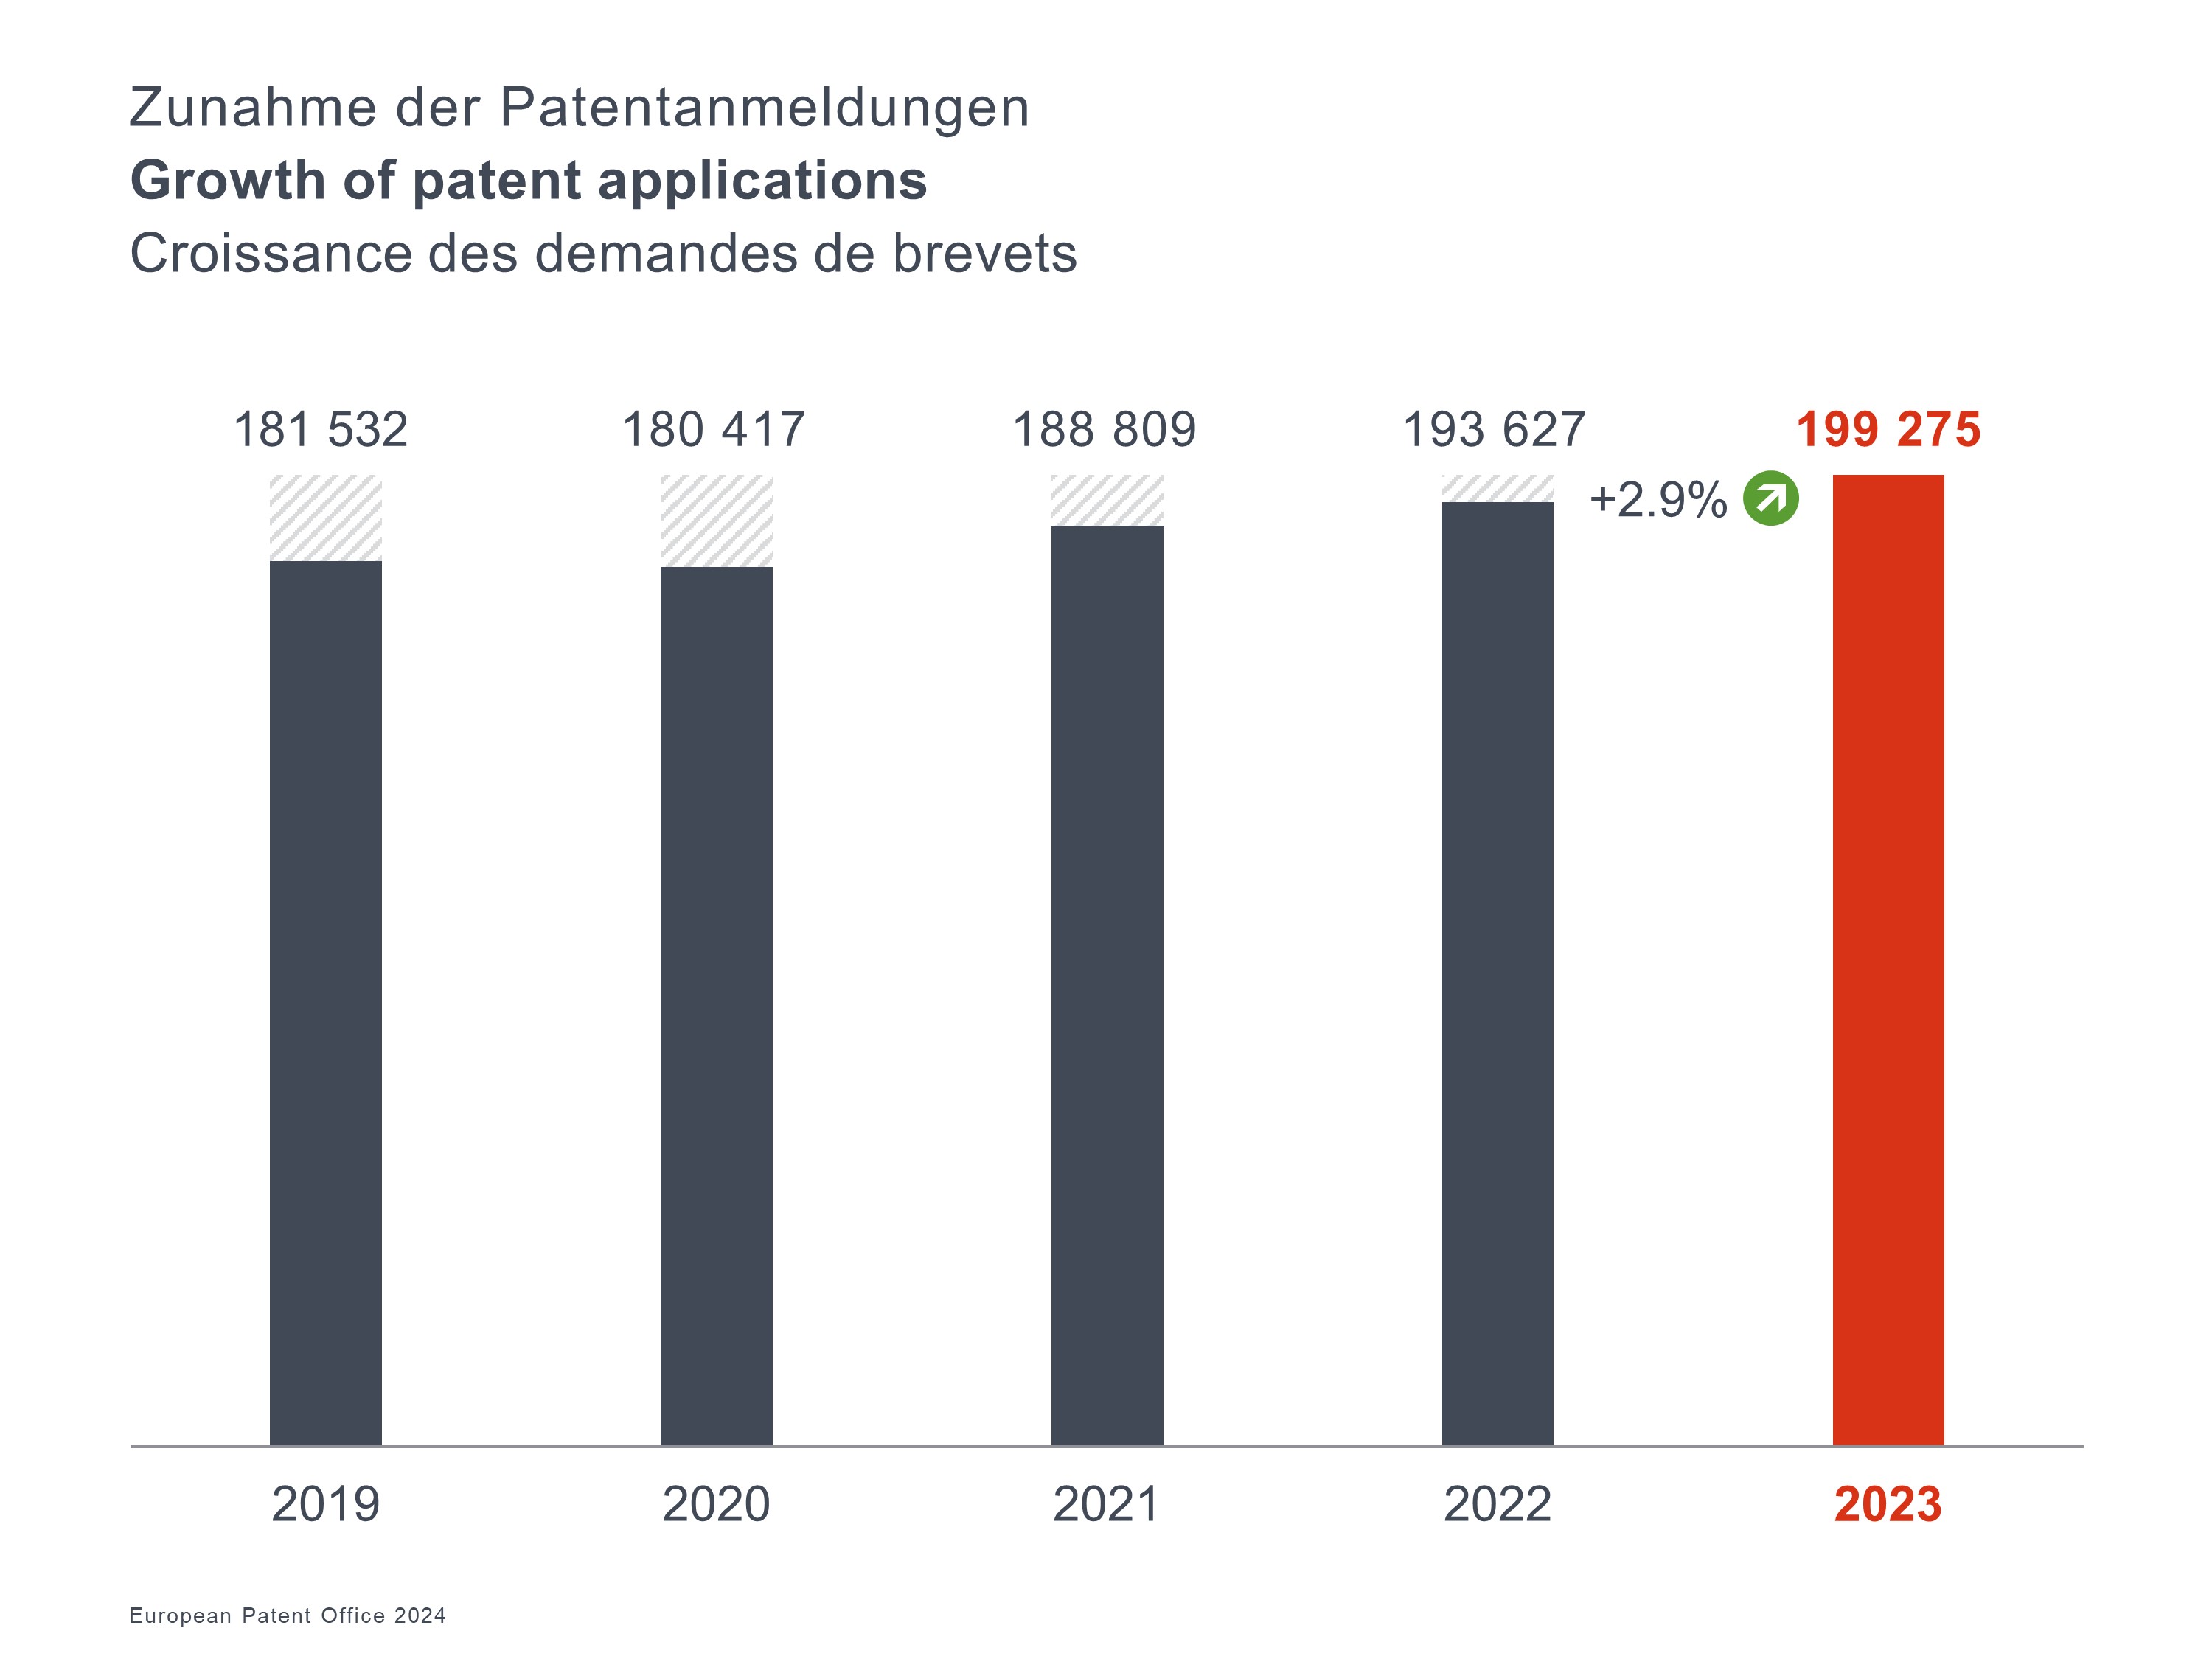 Growth of patent applications 2023